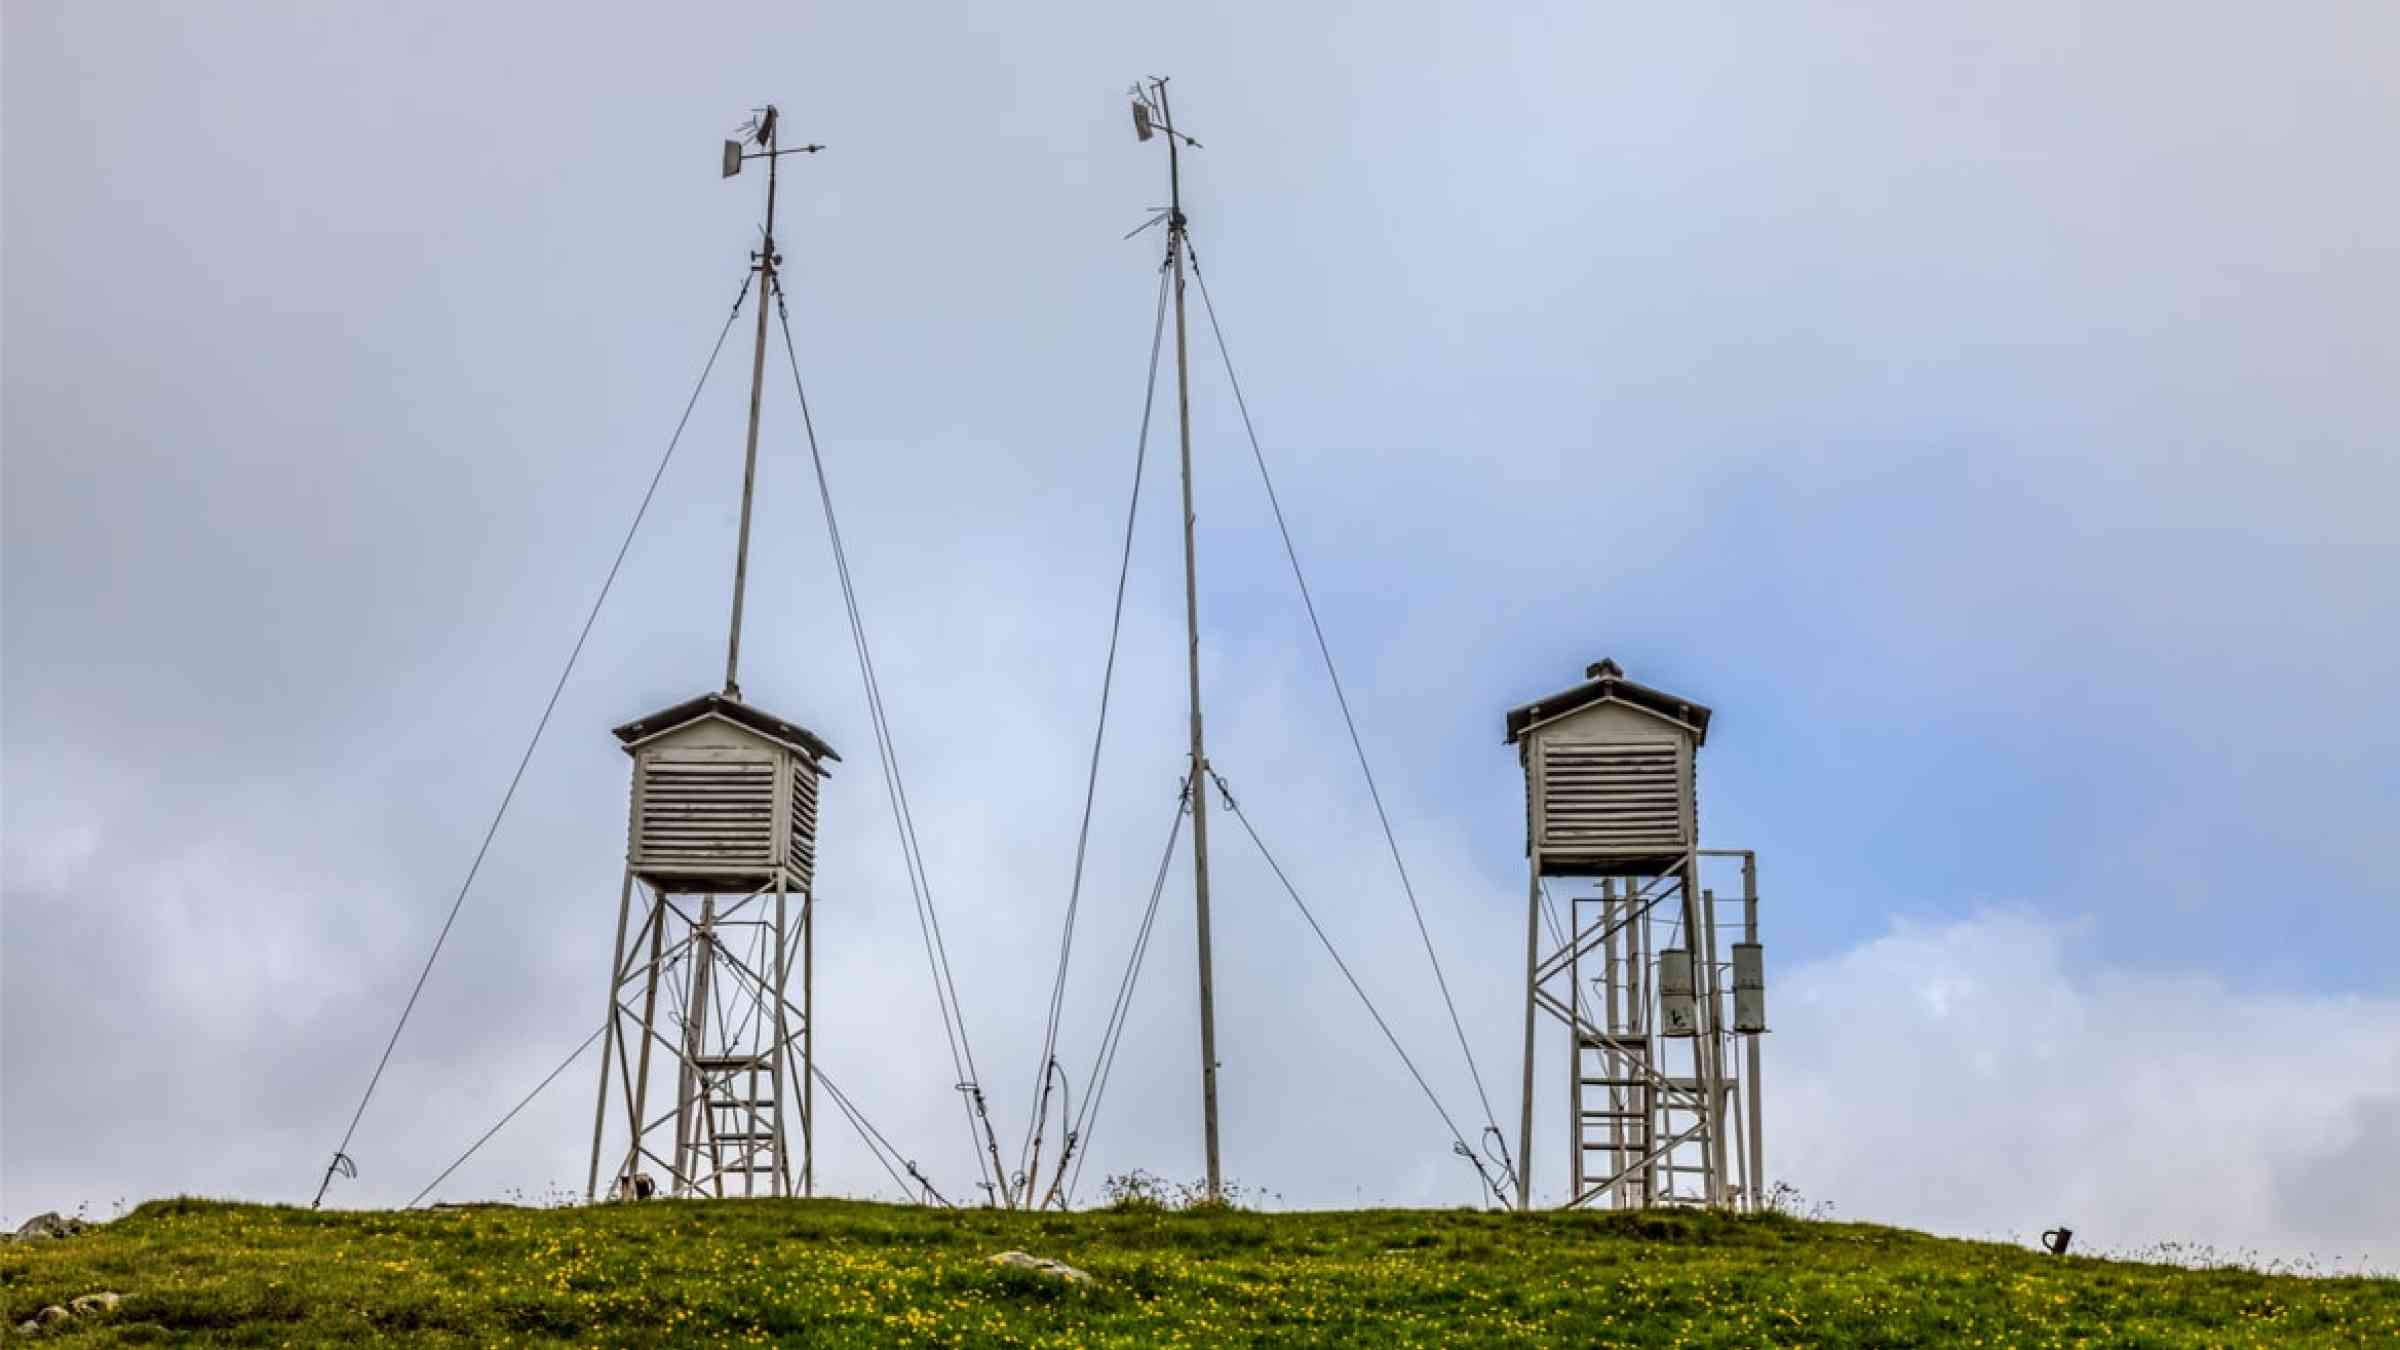 Meteo station at altitude in mountains in a cloudy day